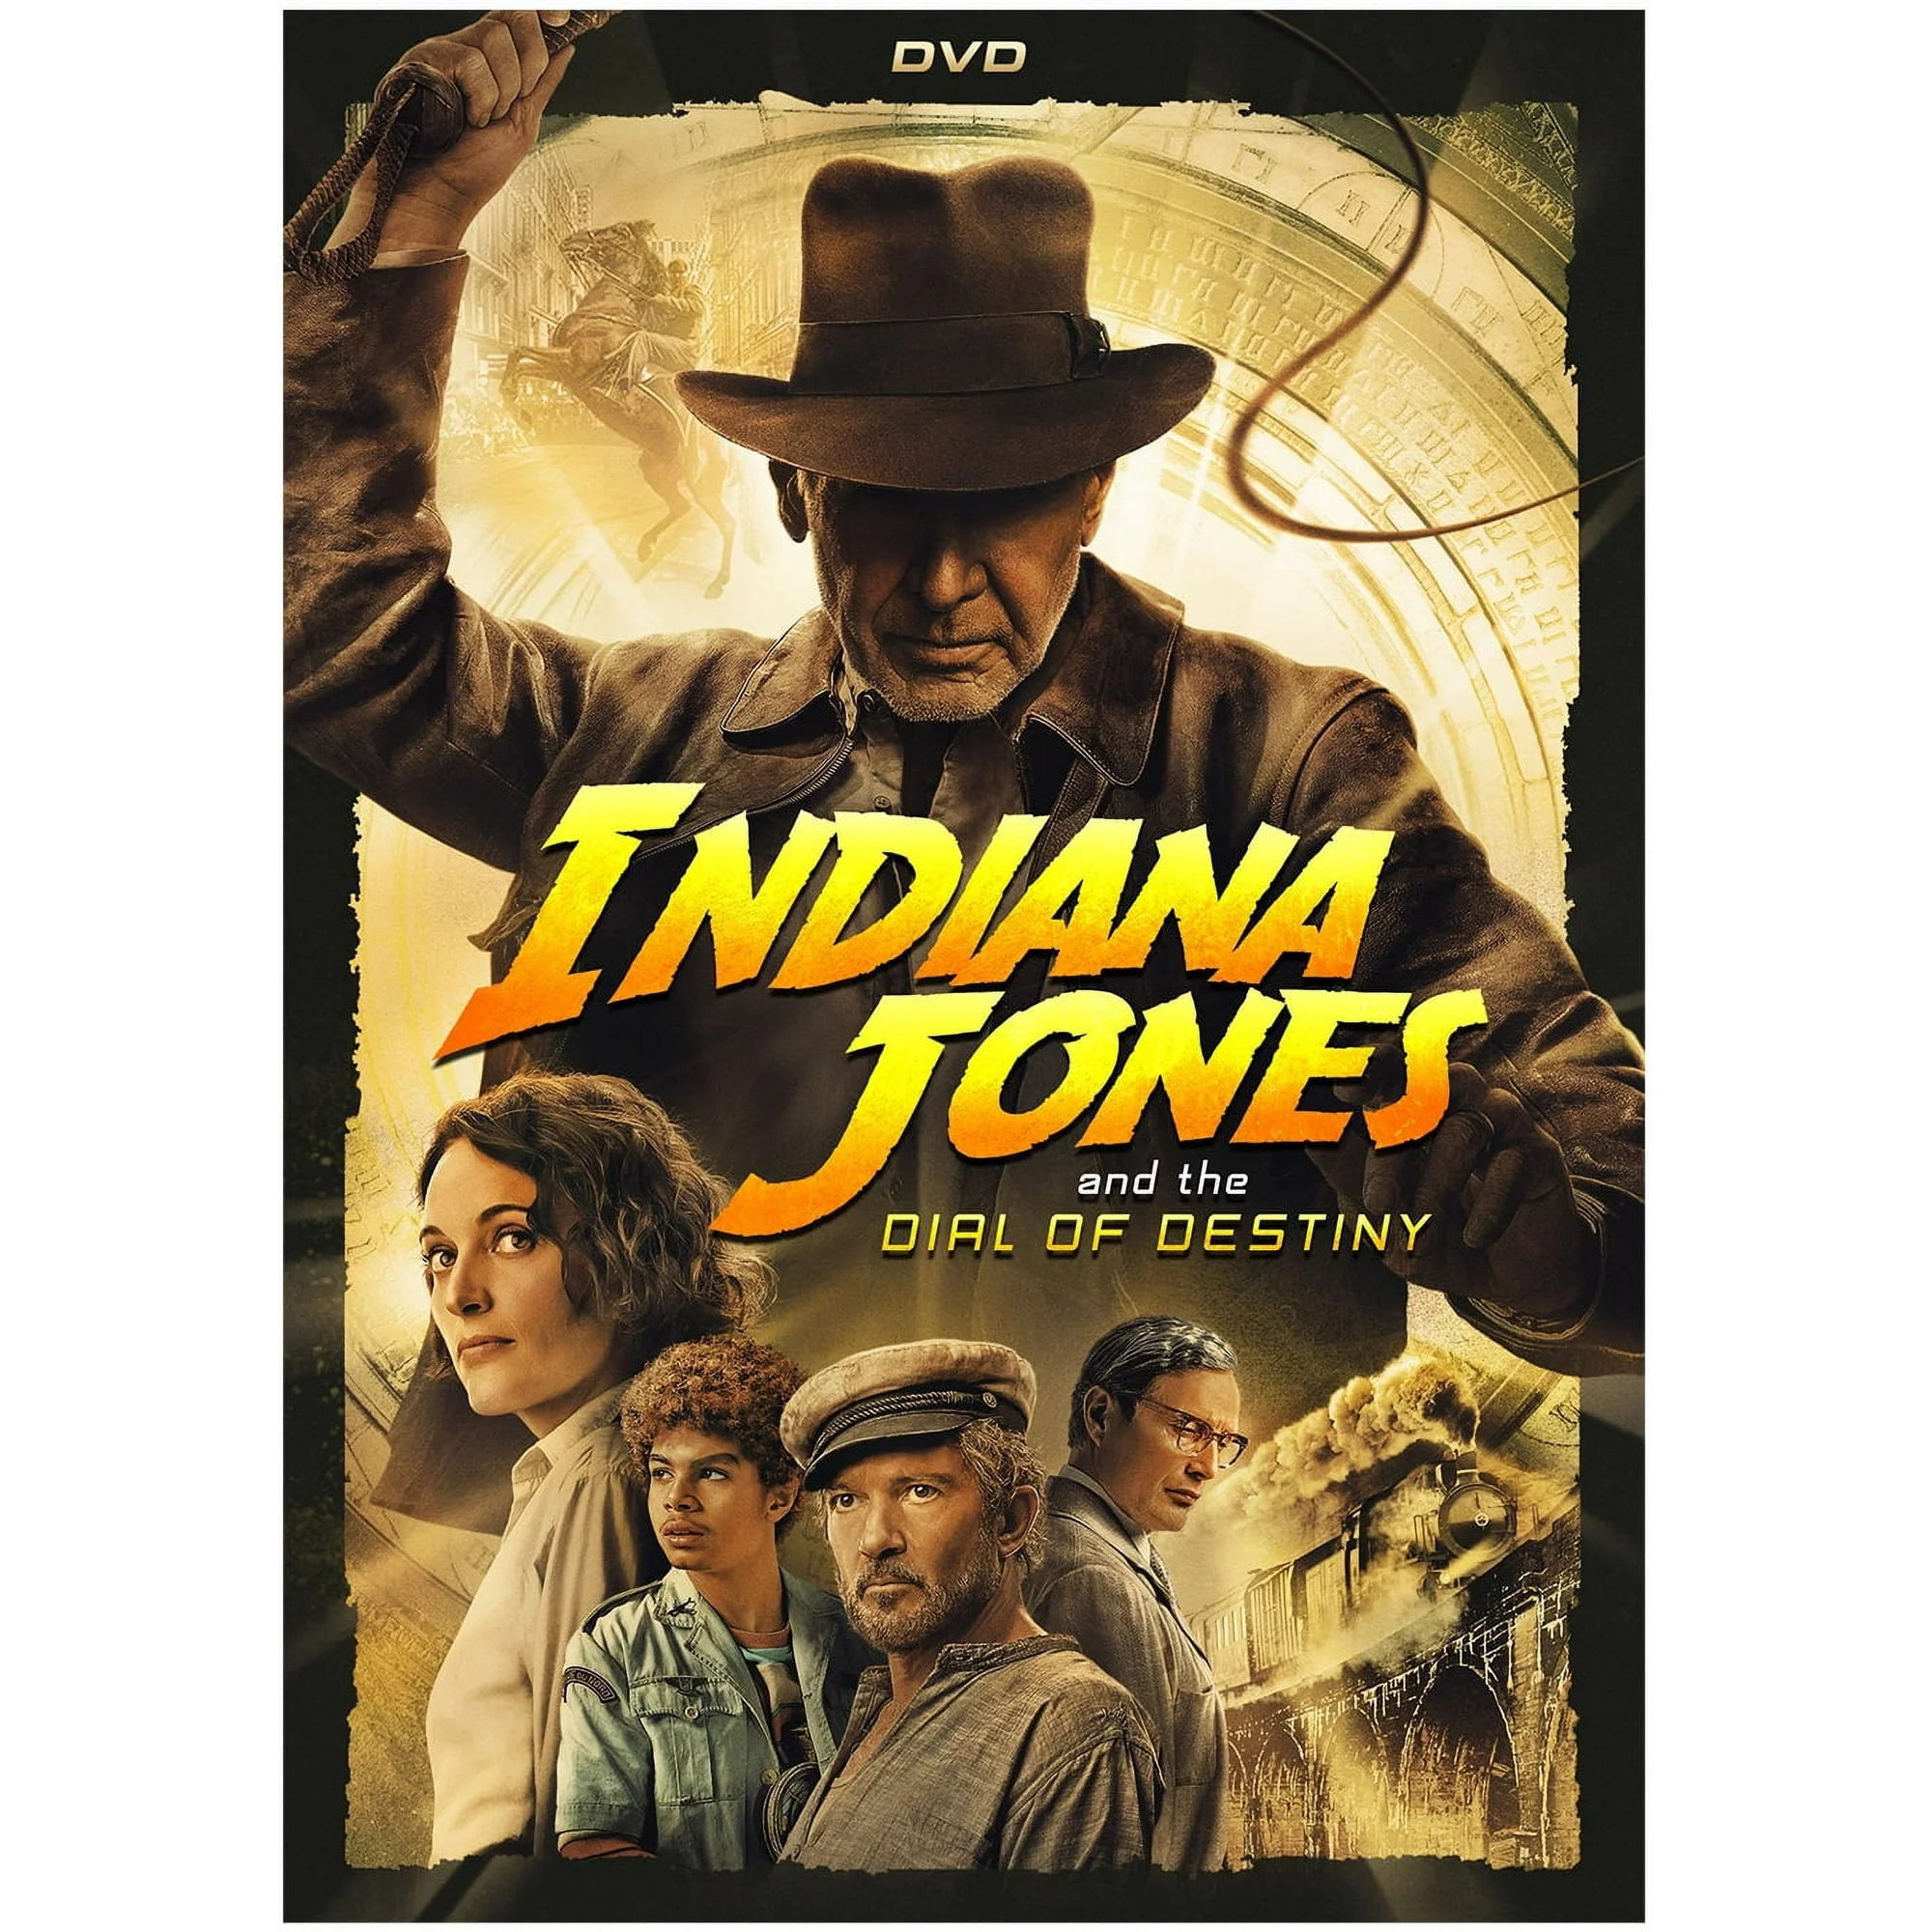 Image for "Indiana Jones and the dial of destiny"